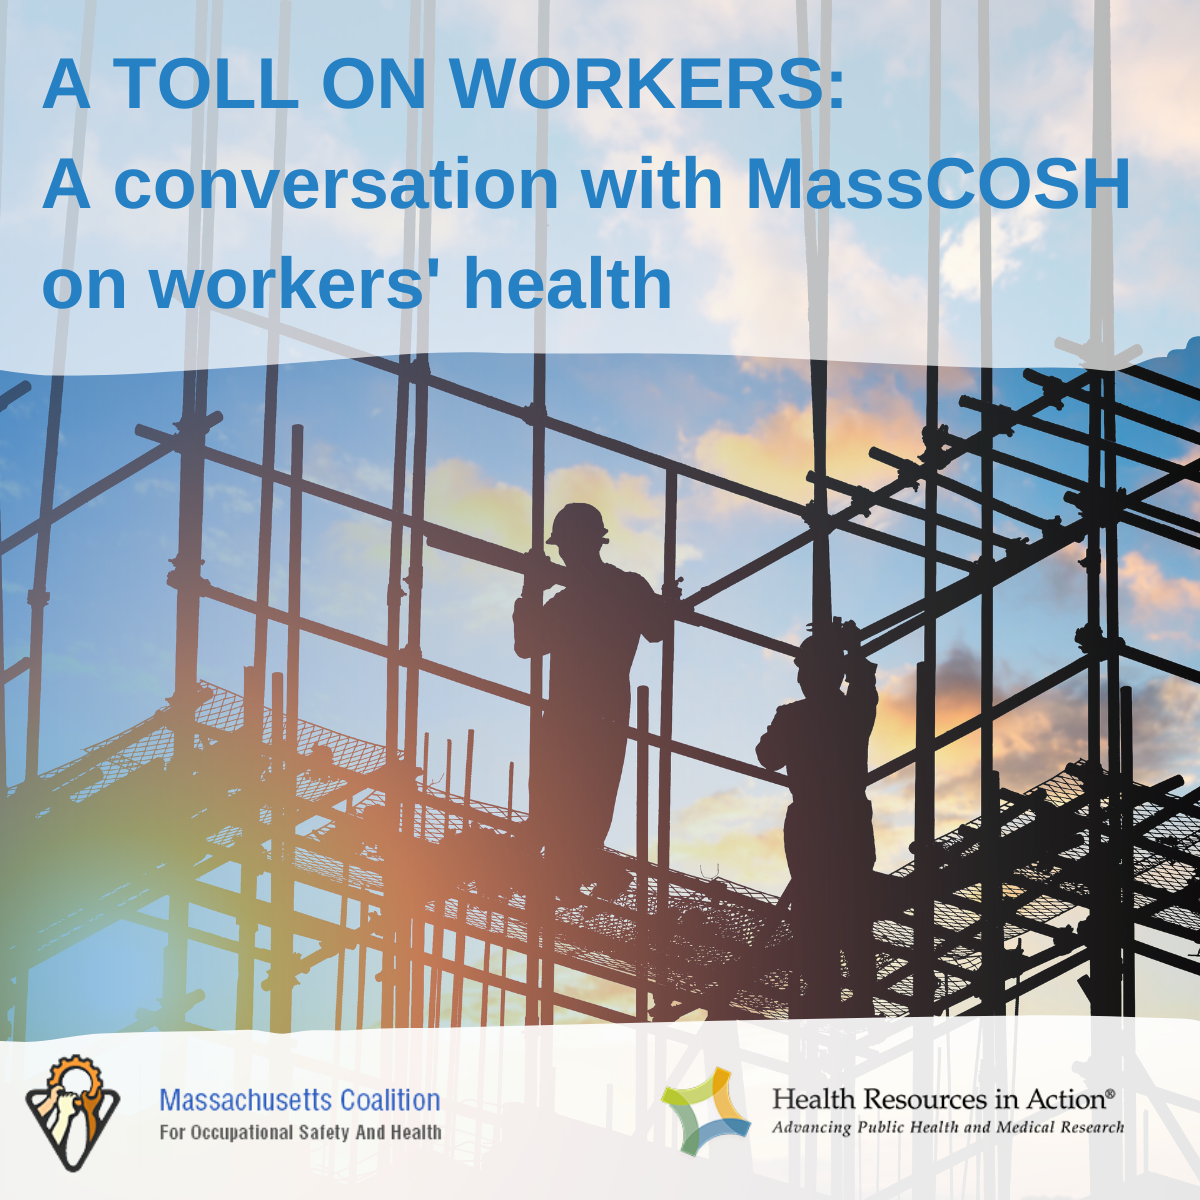 An image of construction workers with an overlay of text: toll on workers: a conversation with MassCOSH on workers' health